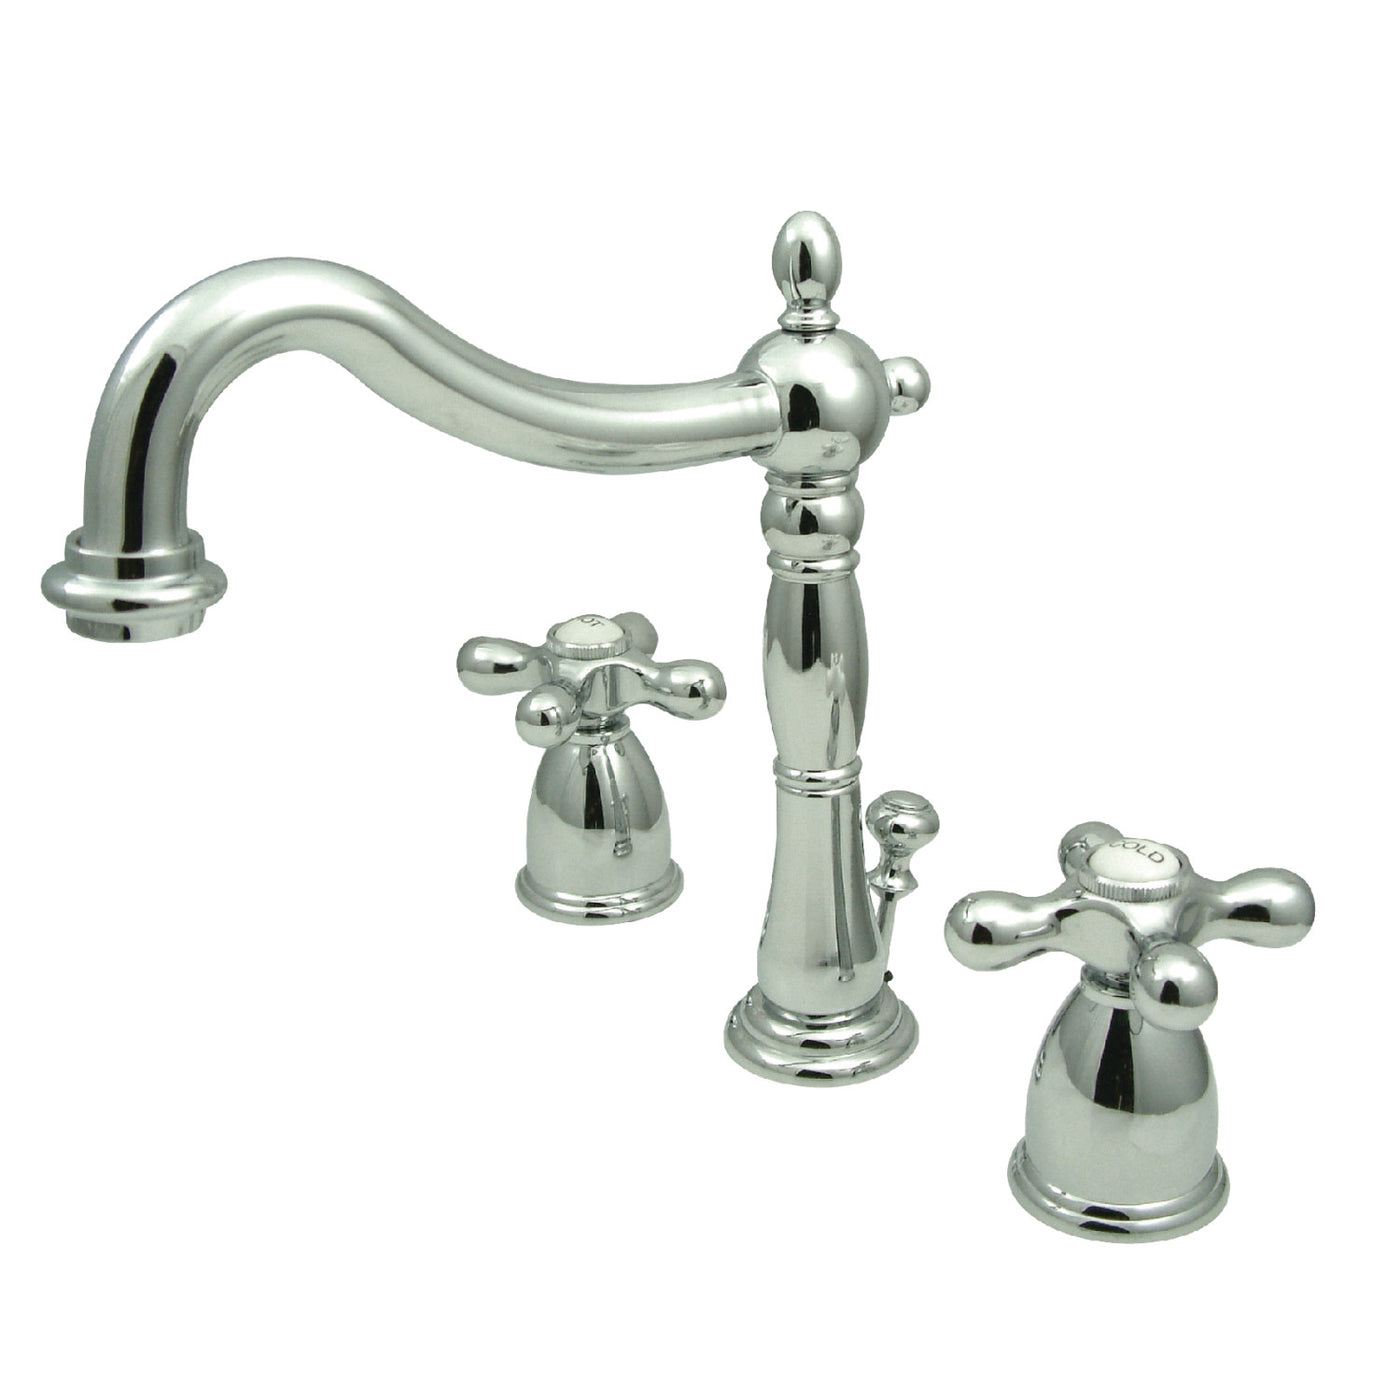 Elements of Design EB1971AX Widespread Bathroom Faucet with Plastic Pop-Up, Polished Chrome